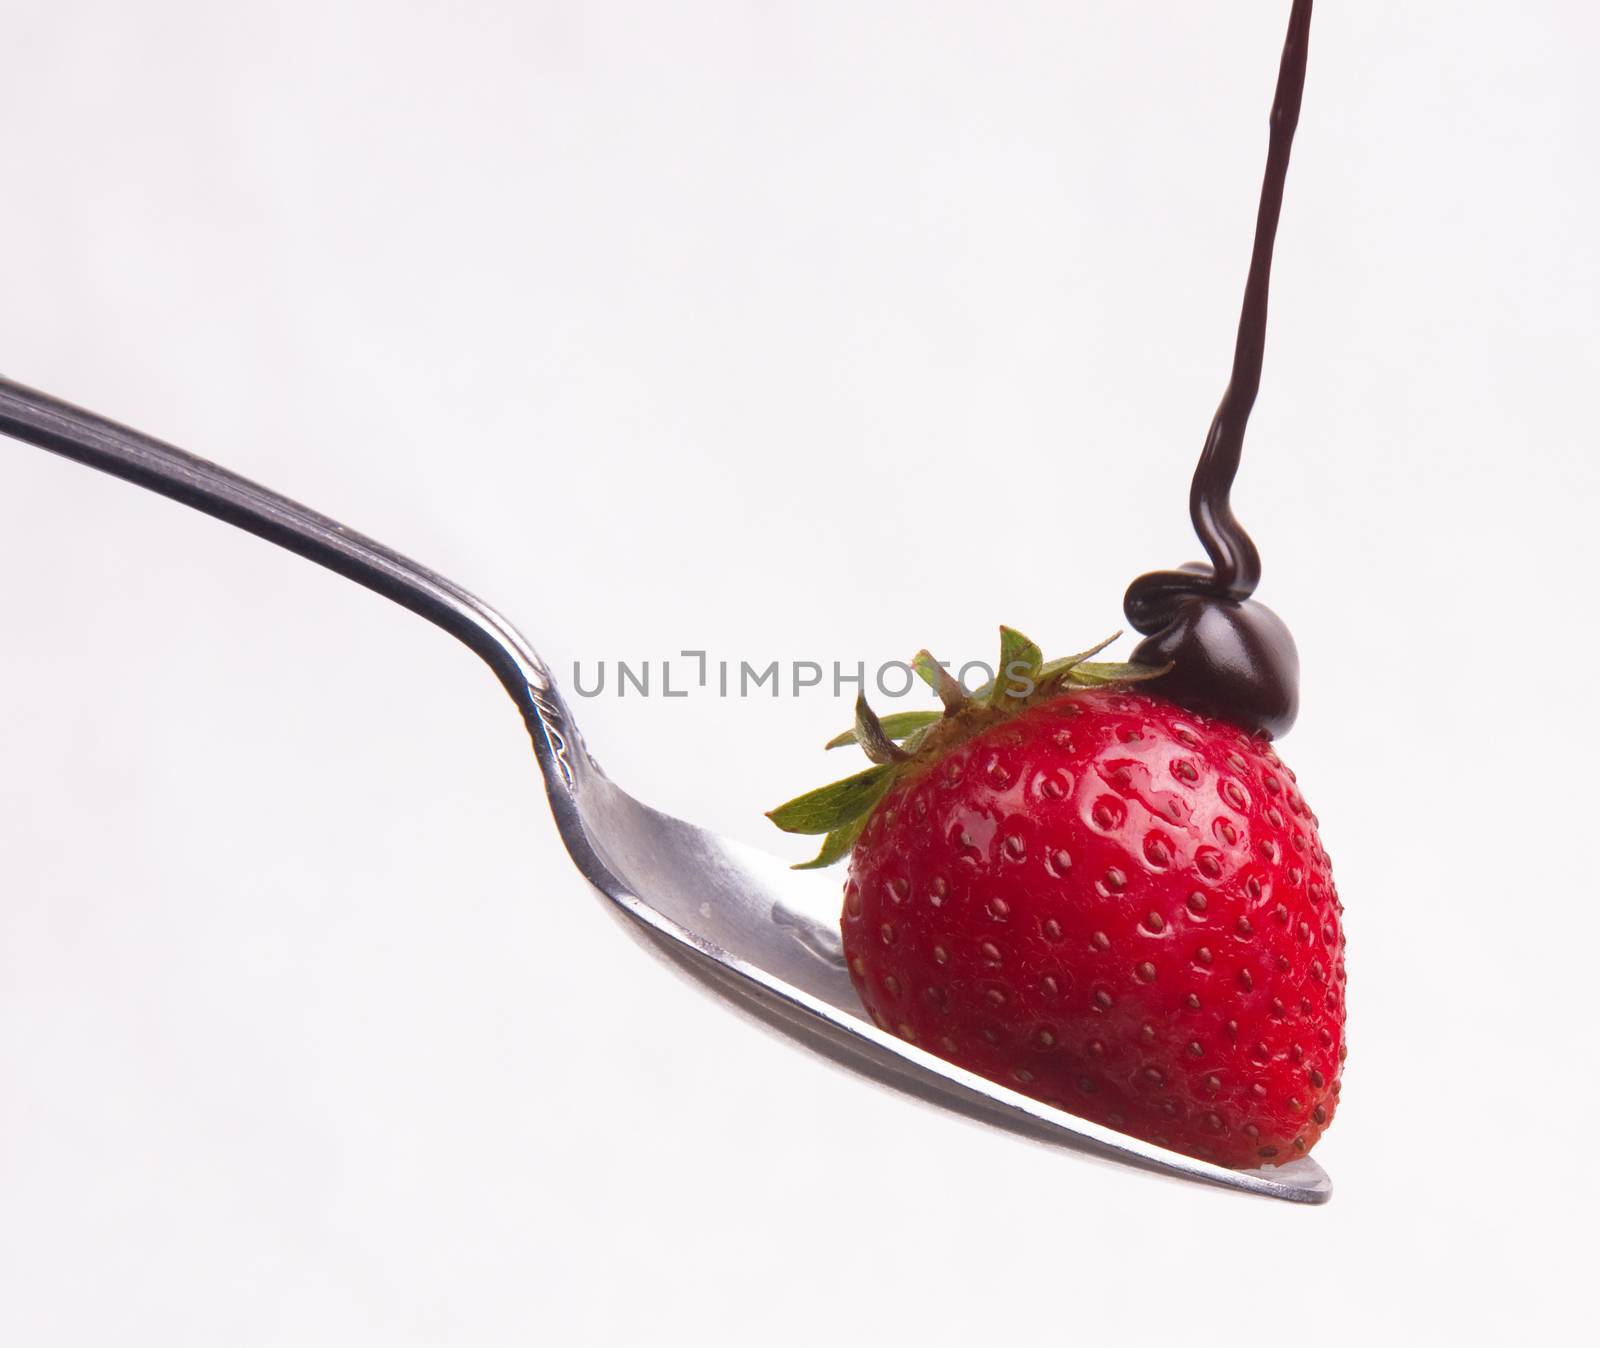 Chocolate hits the Raw Fruit Food Berry on a Spoon by ChrisBoswell